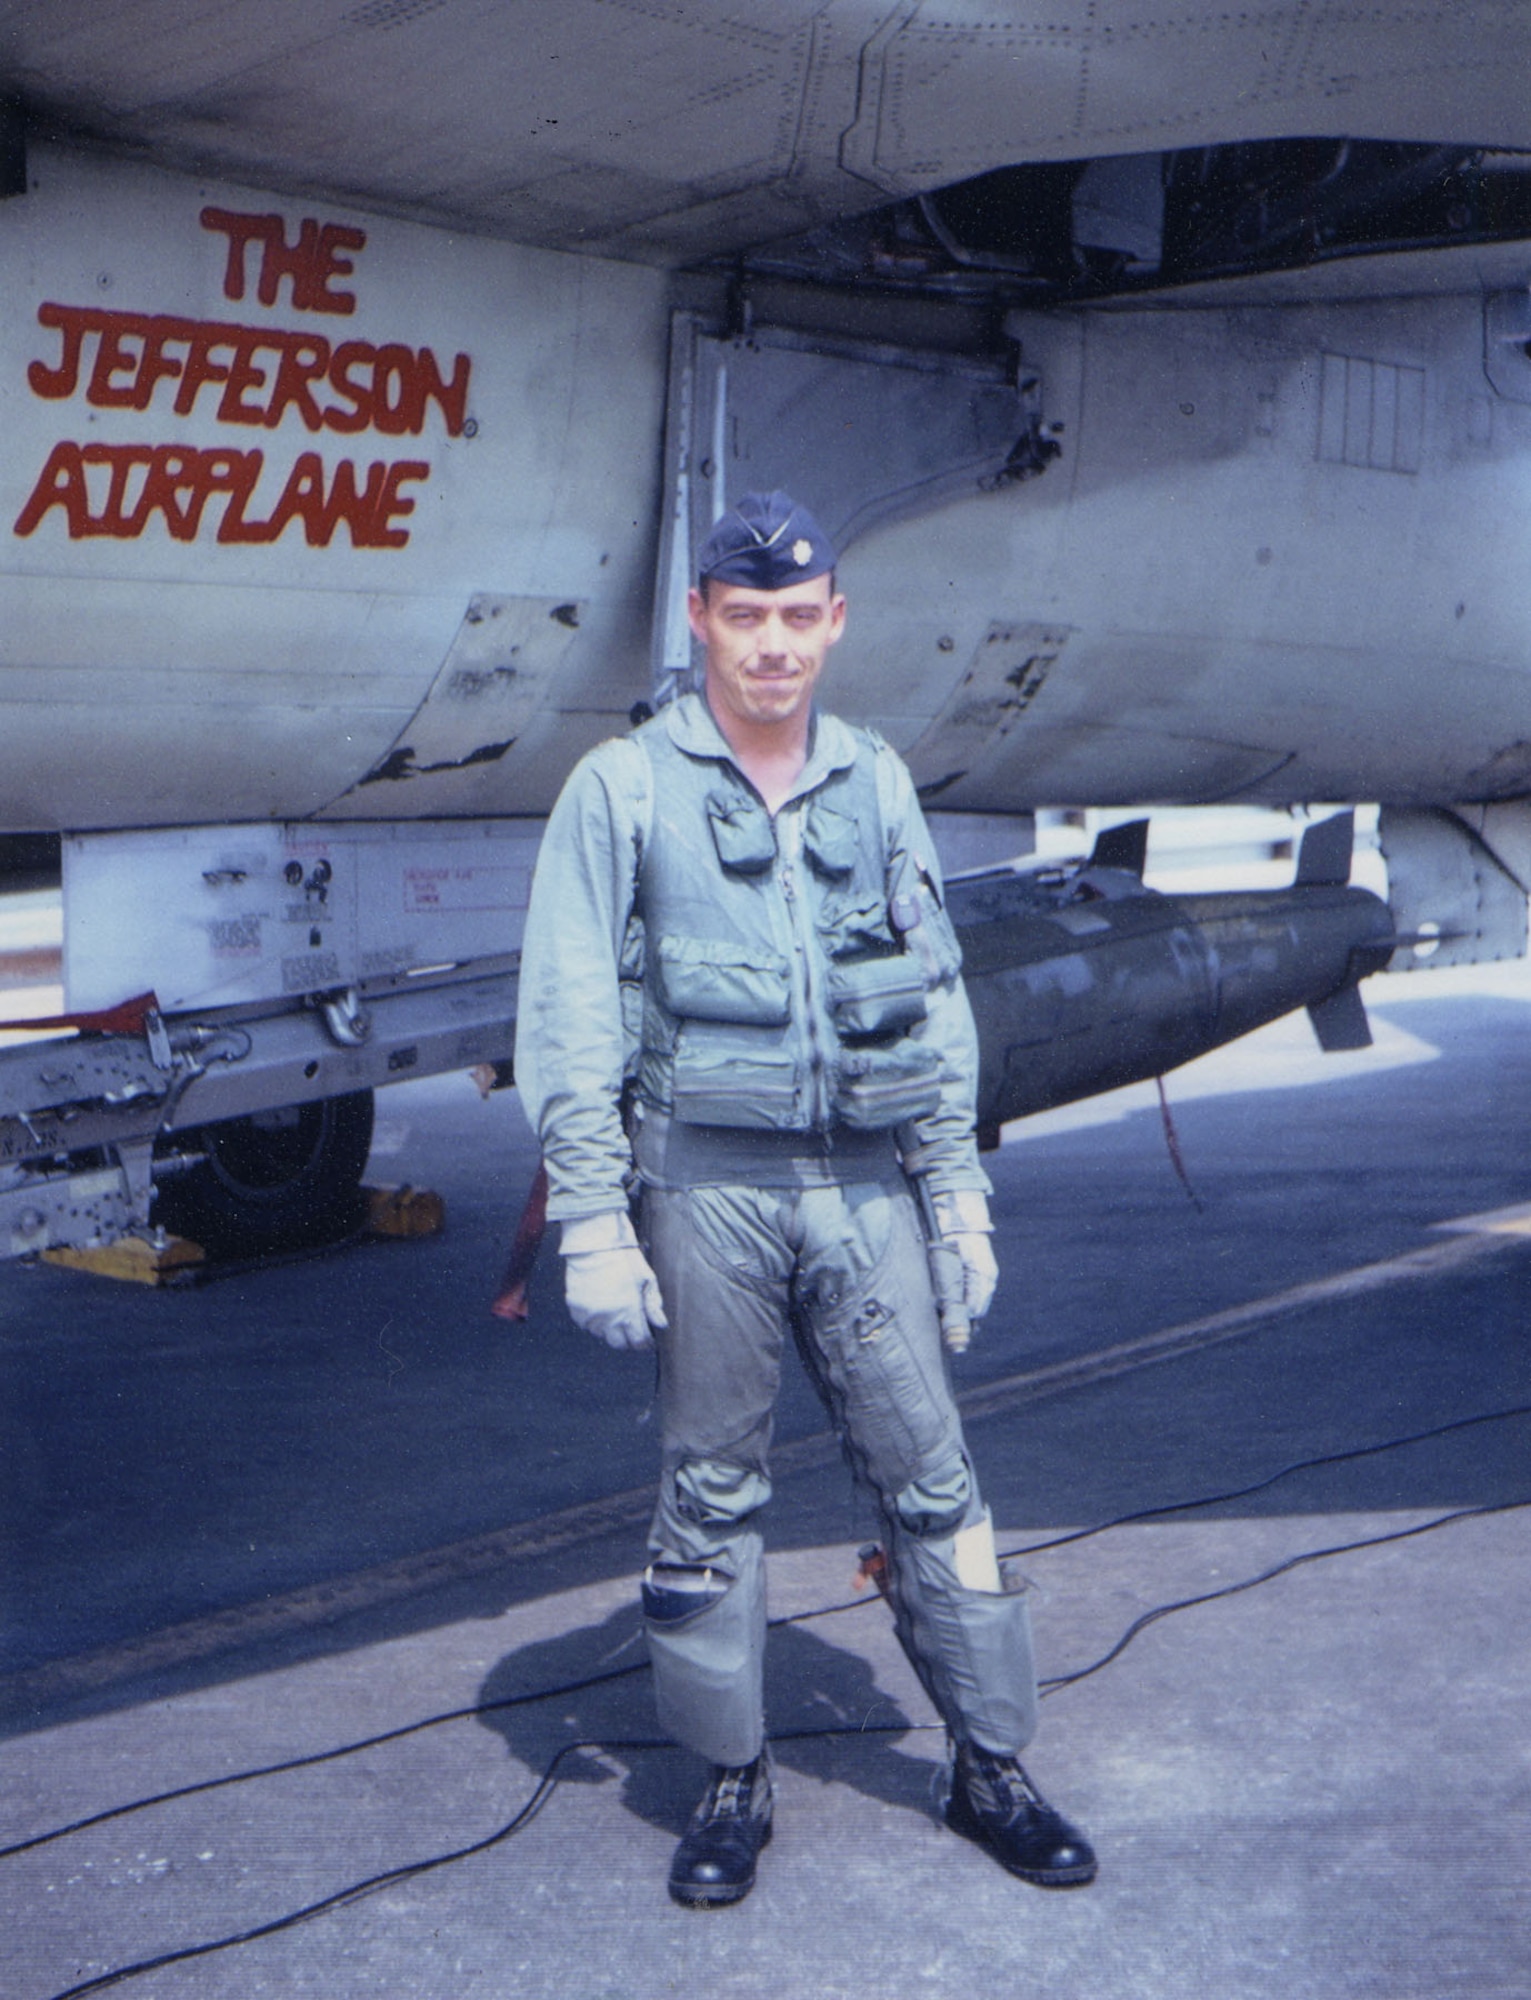 Maj. White wearing the survival vest on display in the museum. (U.S. Air Force photo)